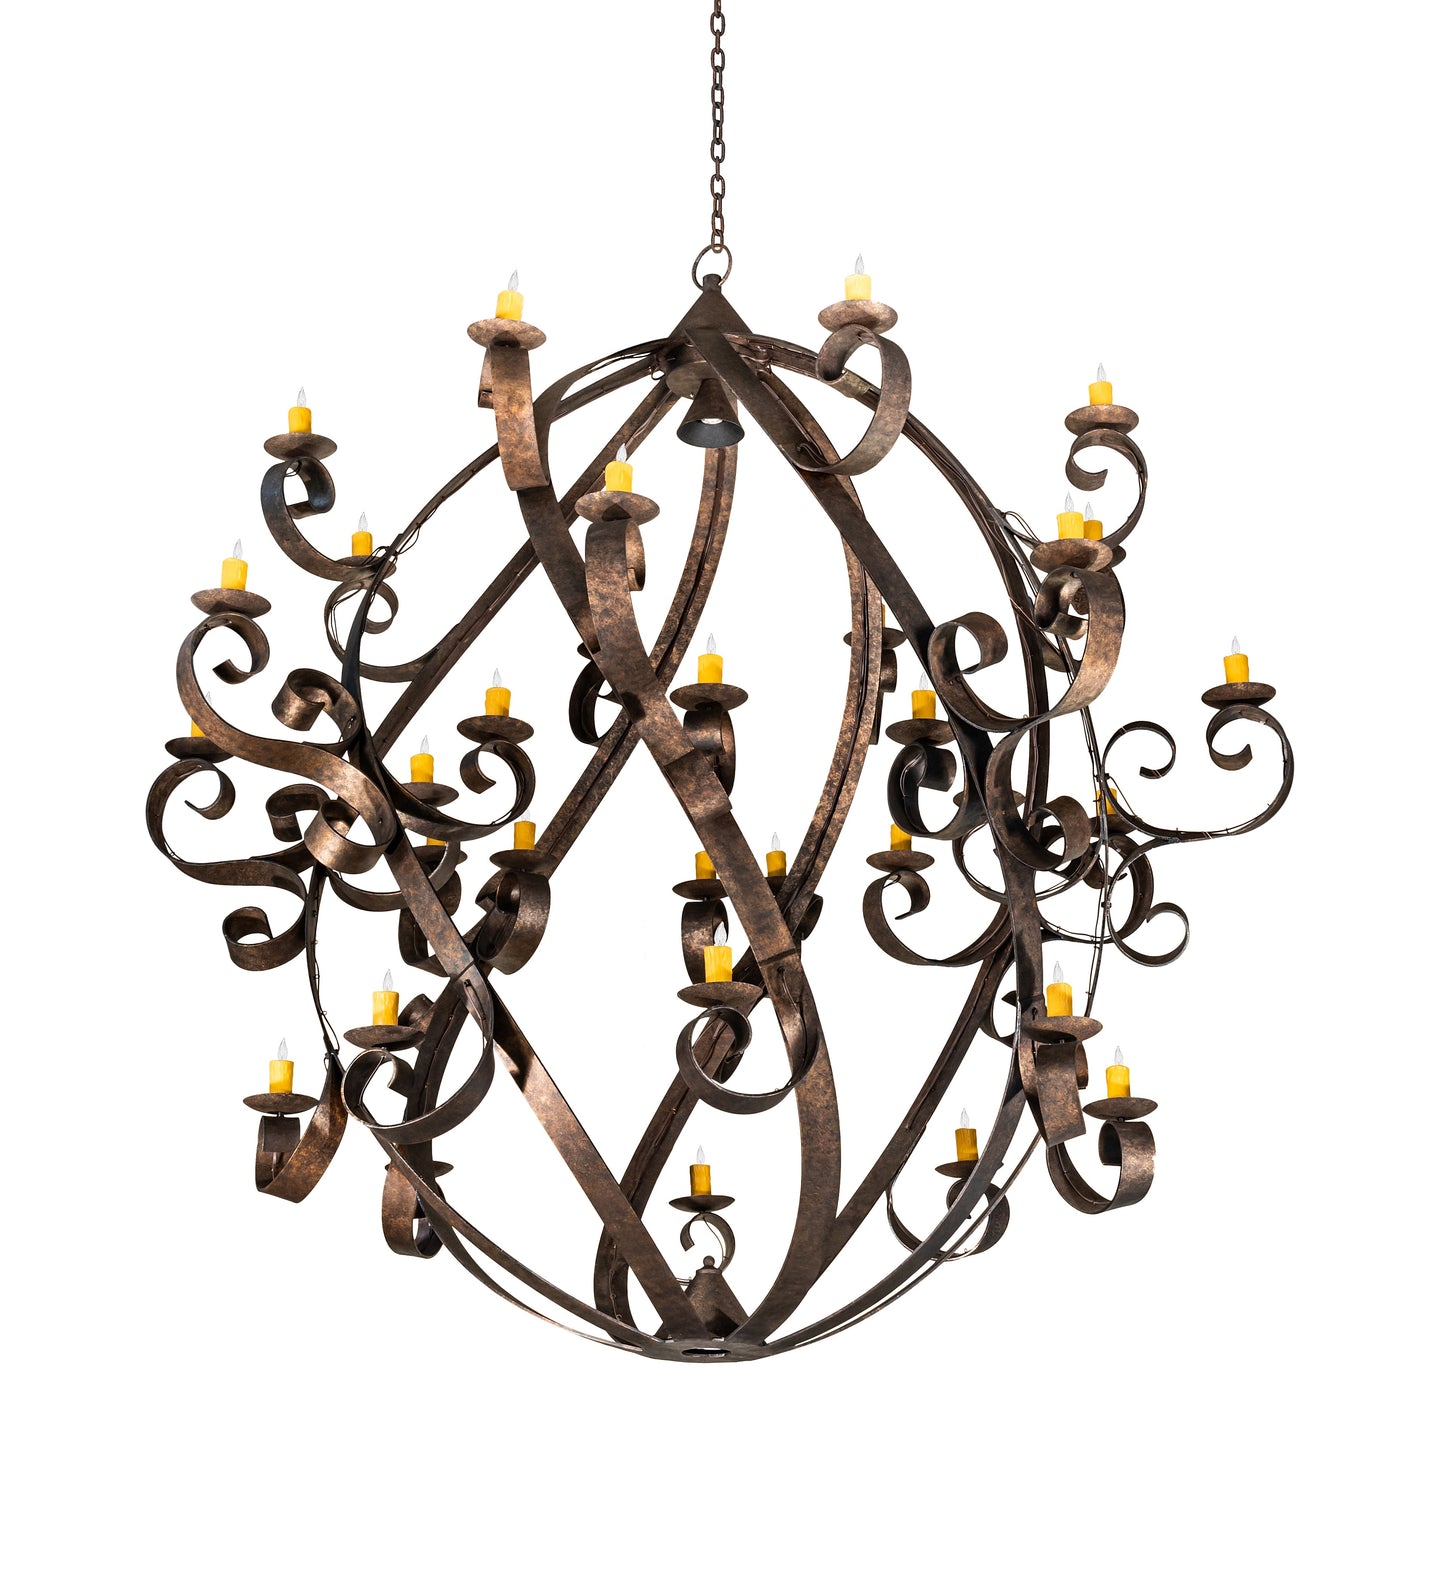 100" Caliope 32-Light Chandelier by 2nd Ave Lighting